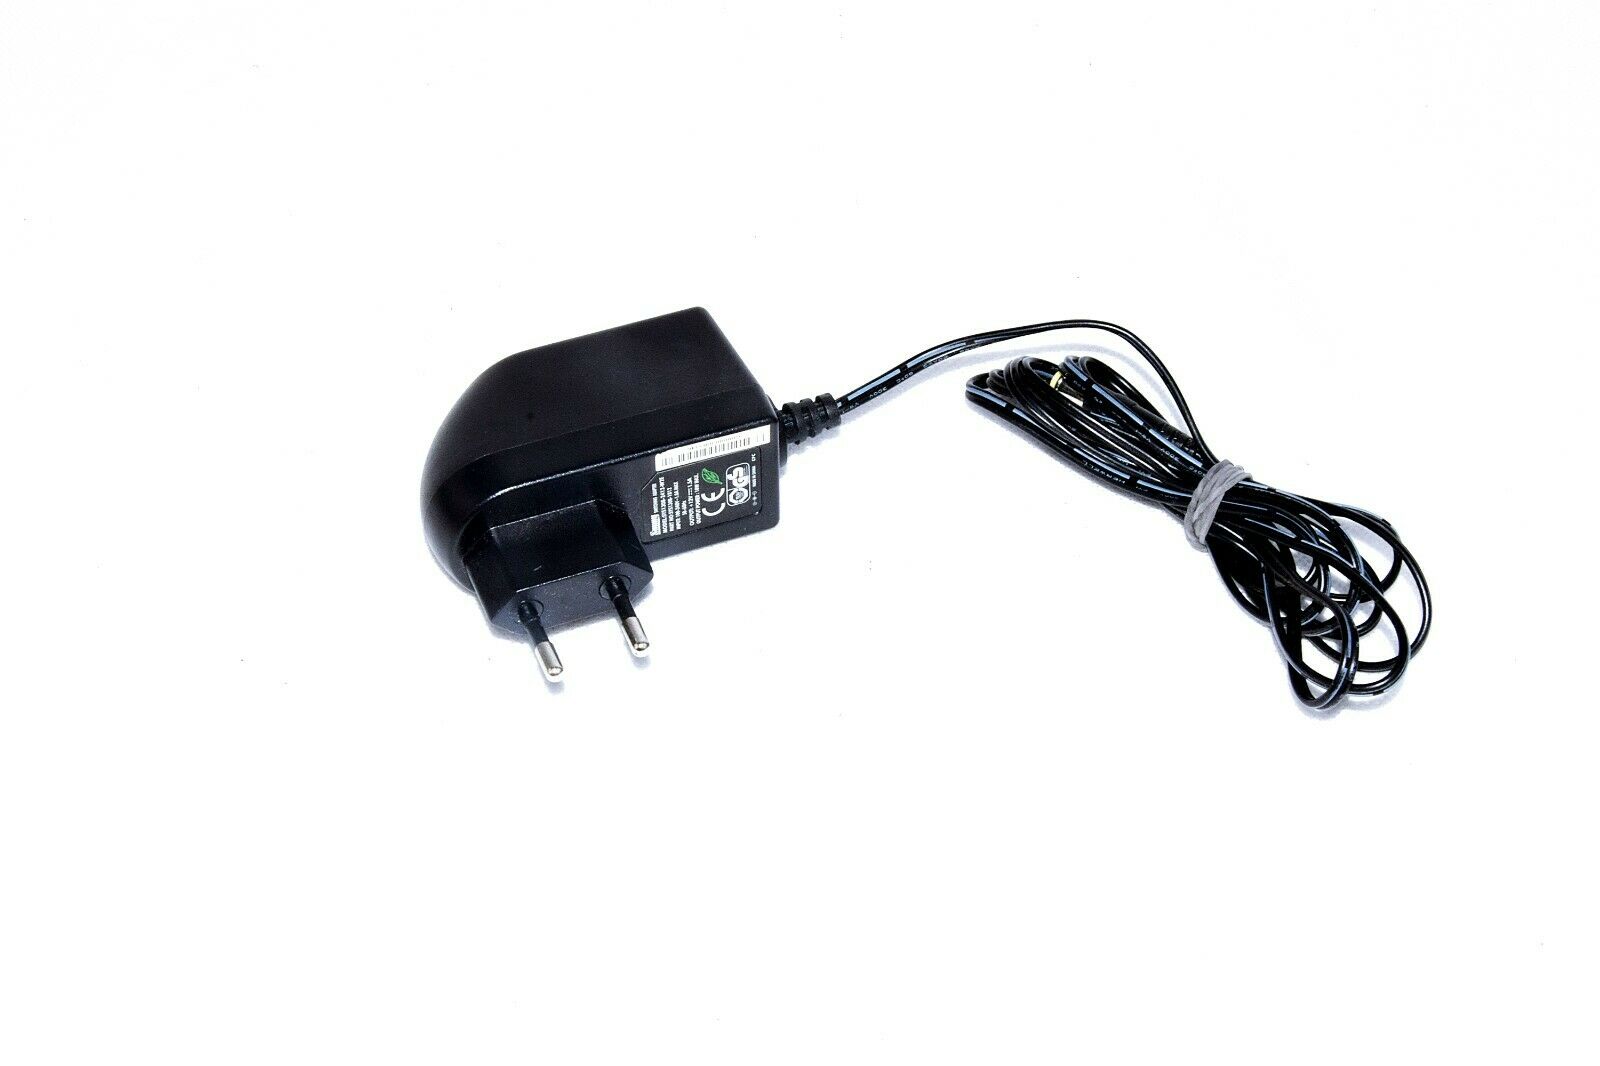 Genuine Power Adapter Sunny SYS1308-2412-W2E SYS1308-1812 12V 1,5A 18W Adapter